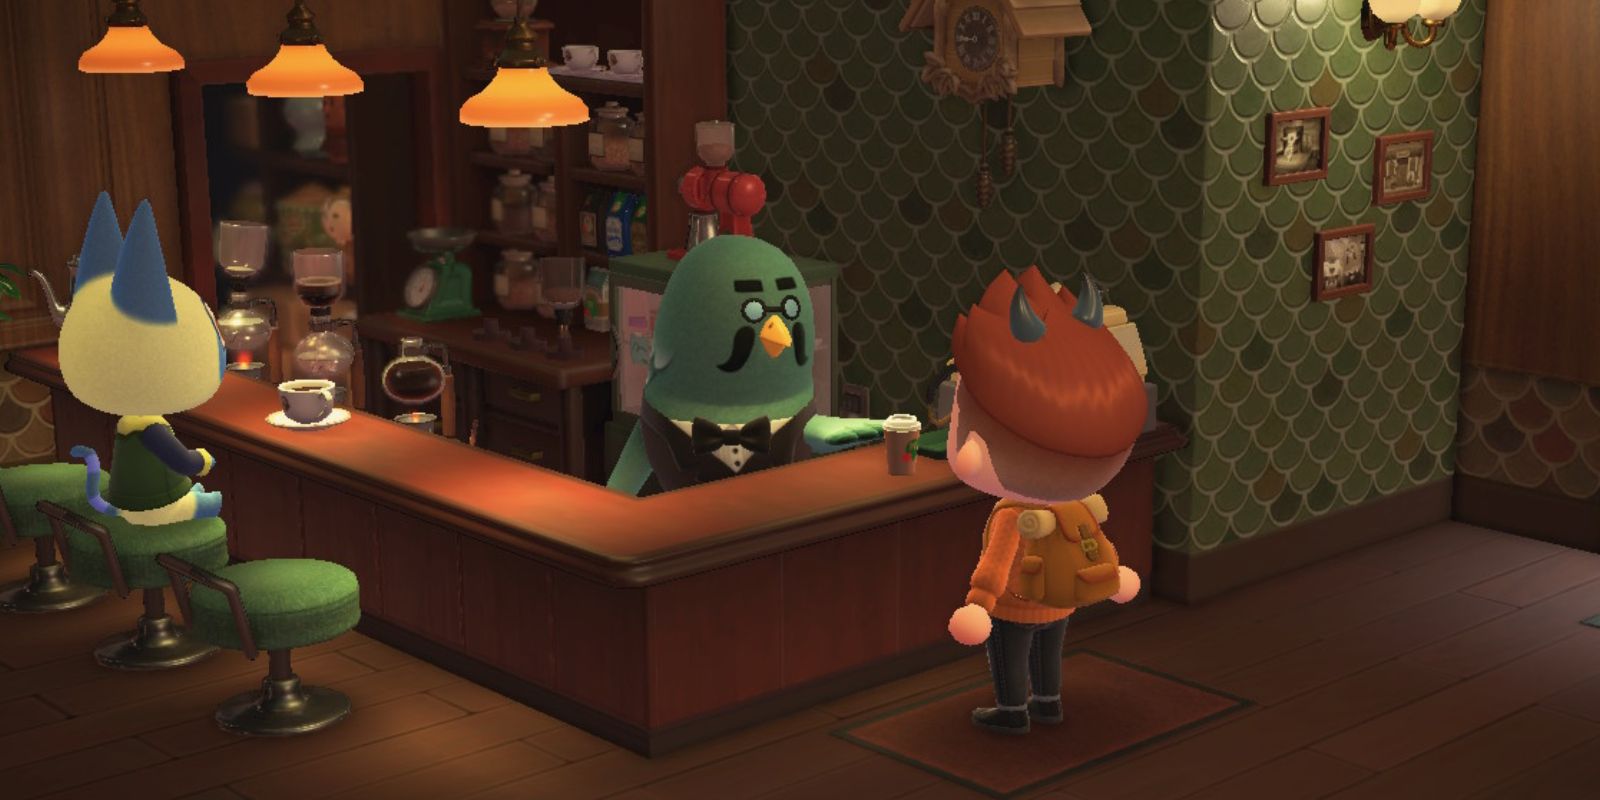 Brewster serves coffee to-go at The Roost in Animal Crossing: New Horizons.